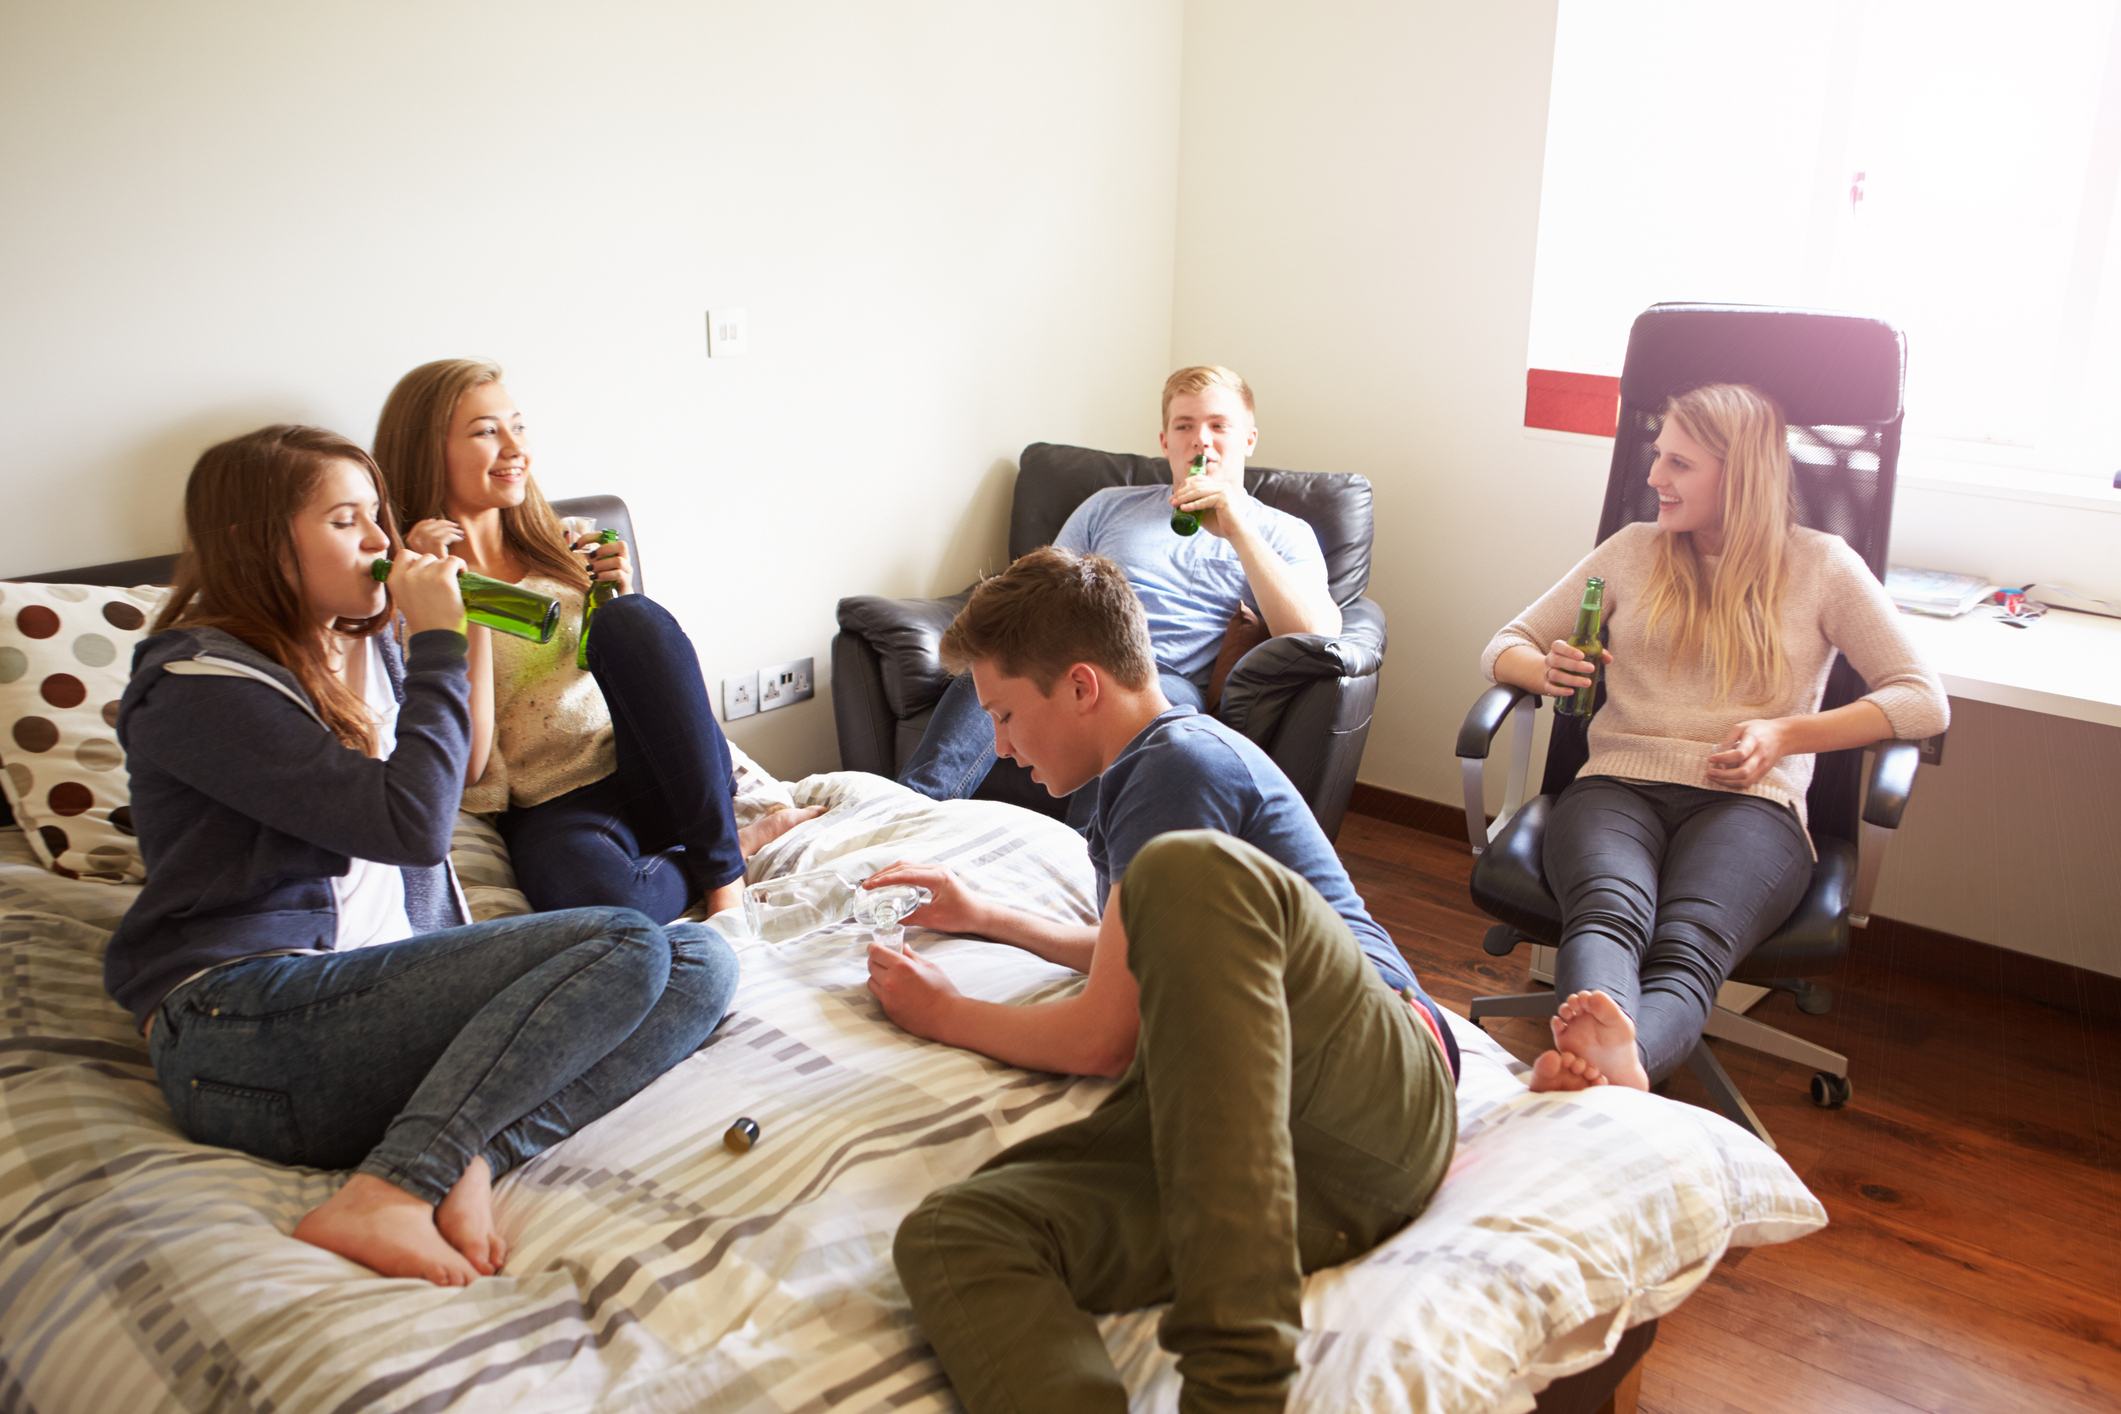 Group Of Teenagers Drinking Alcohol In Bedroom.